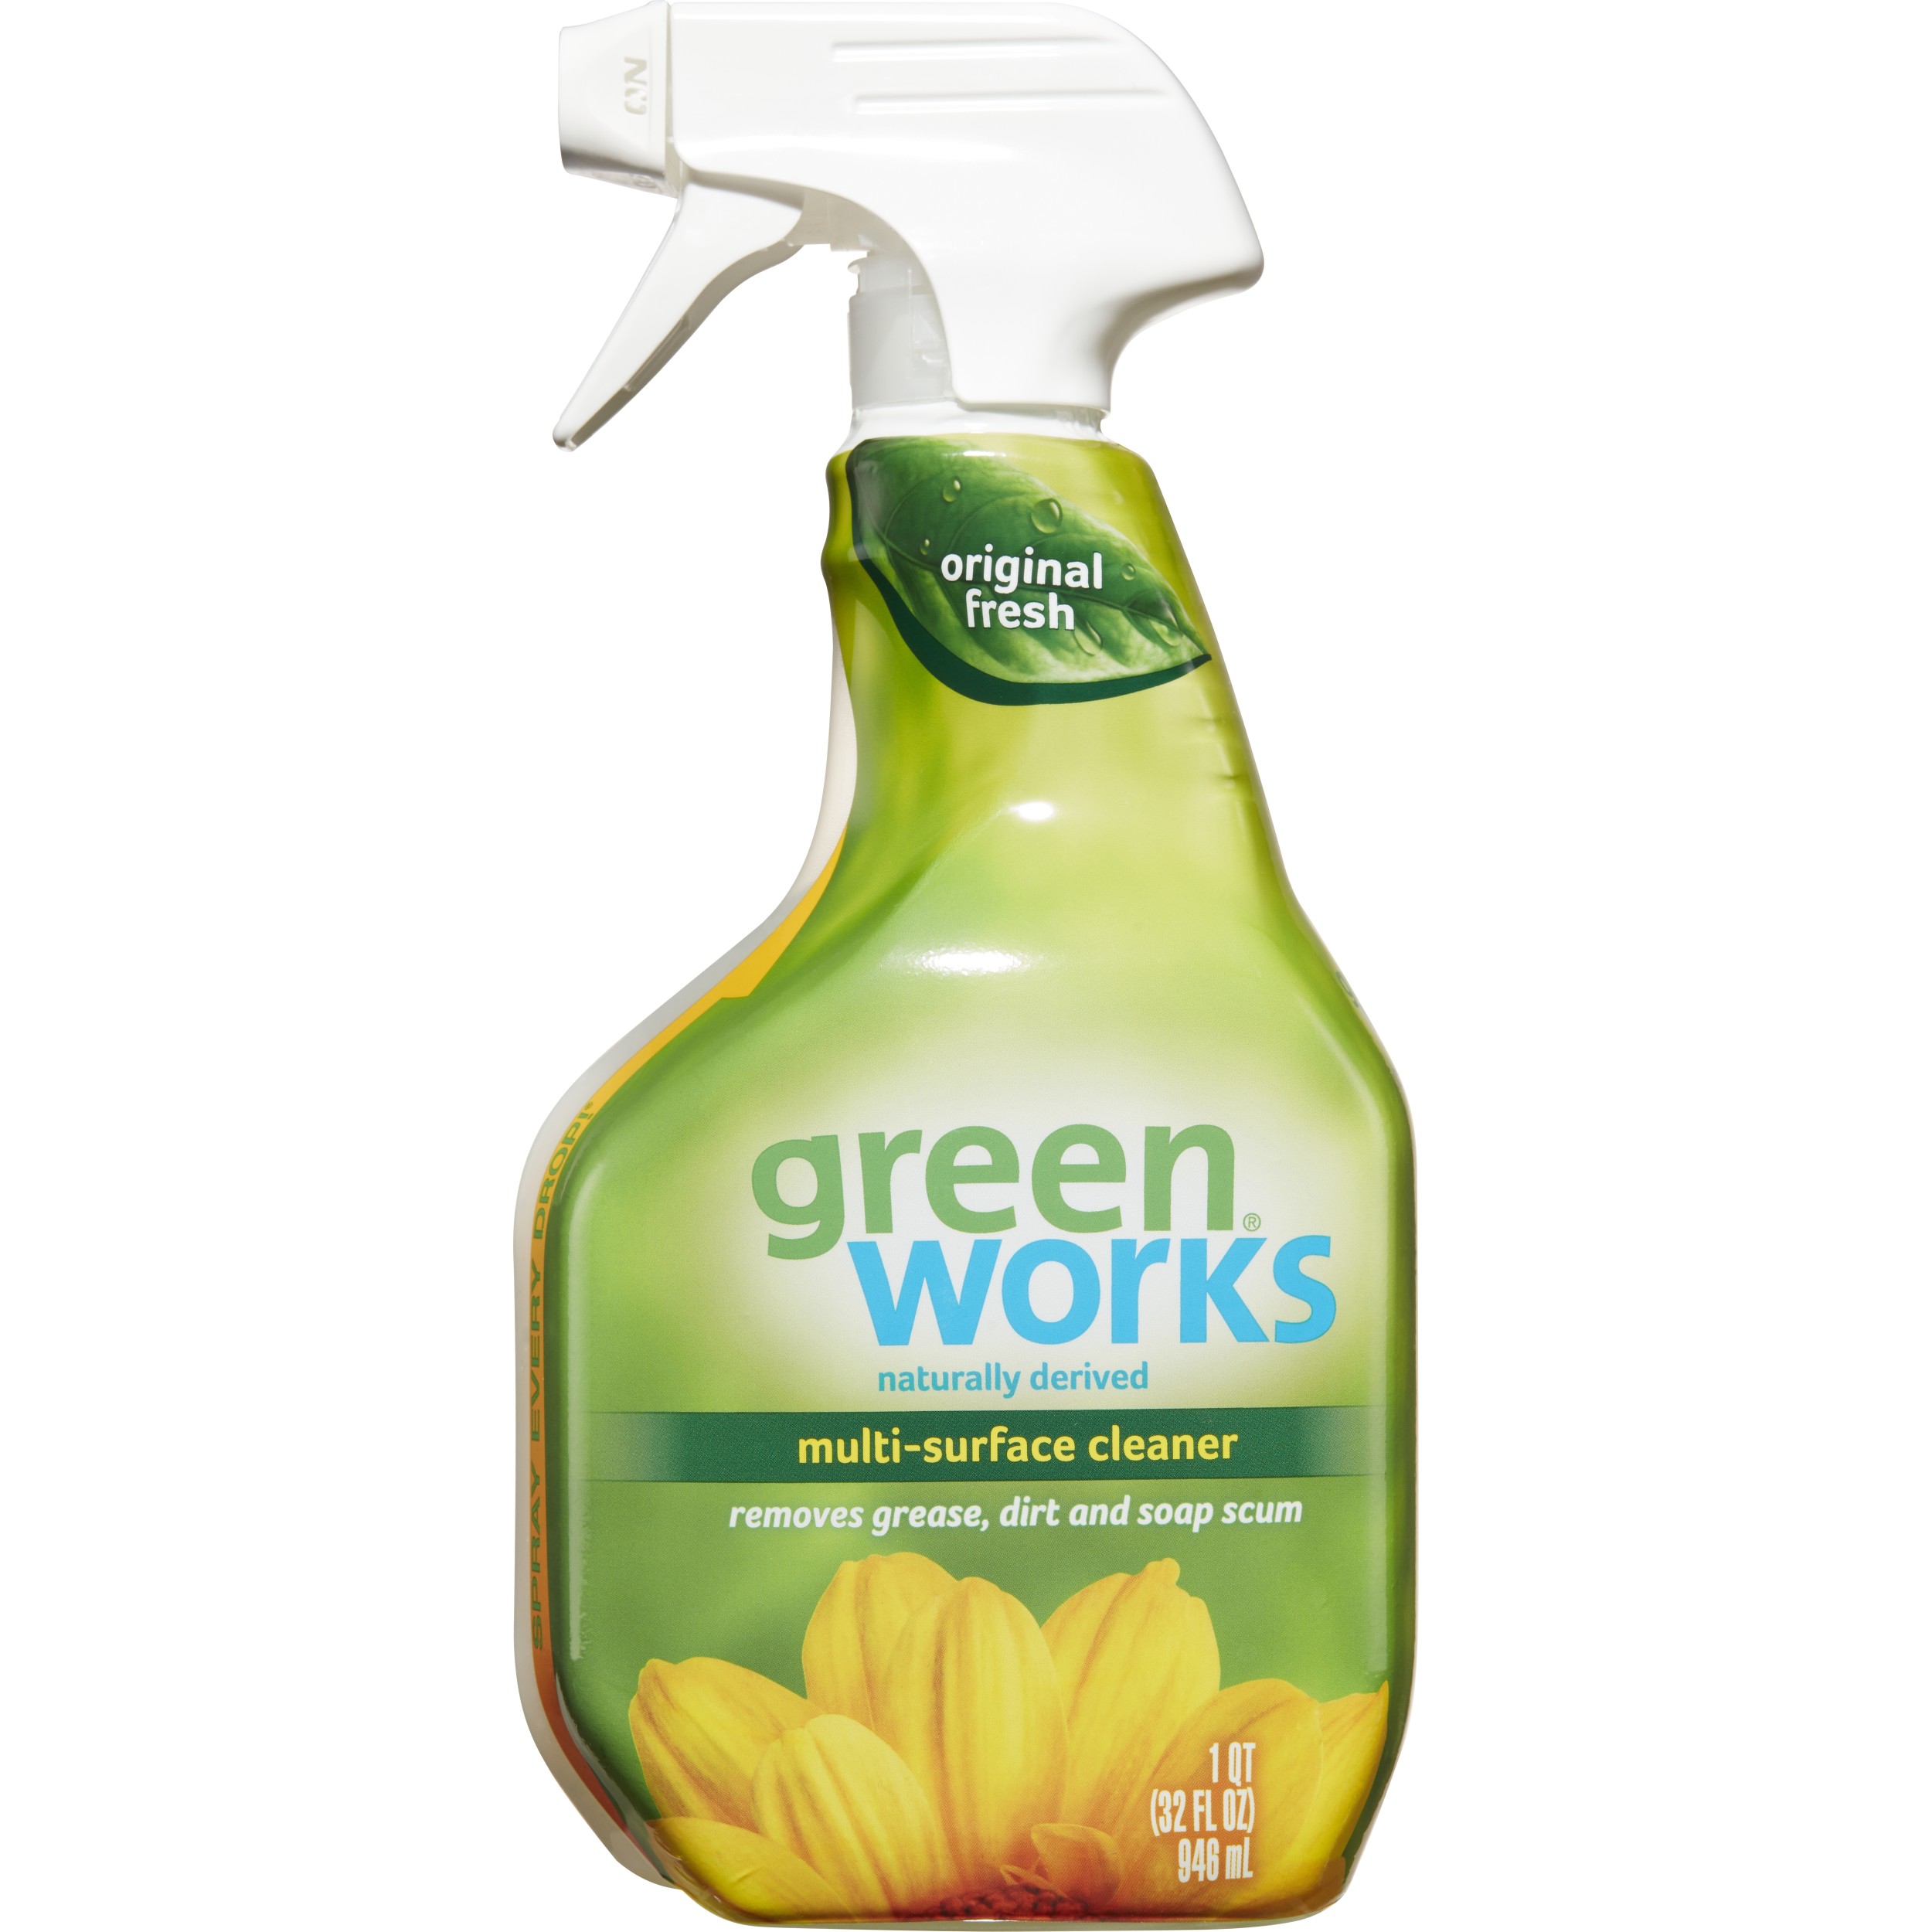 Green Works Multi-Surface Cleaner, Cleaning Spray - Original Fresh, 32 oz - image 1 of 4